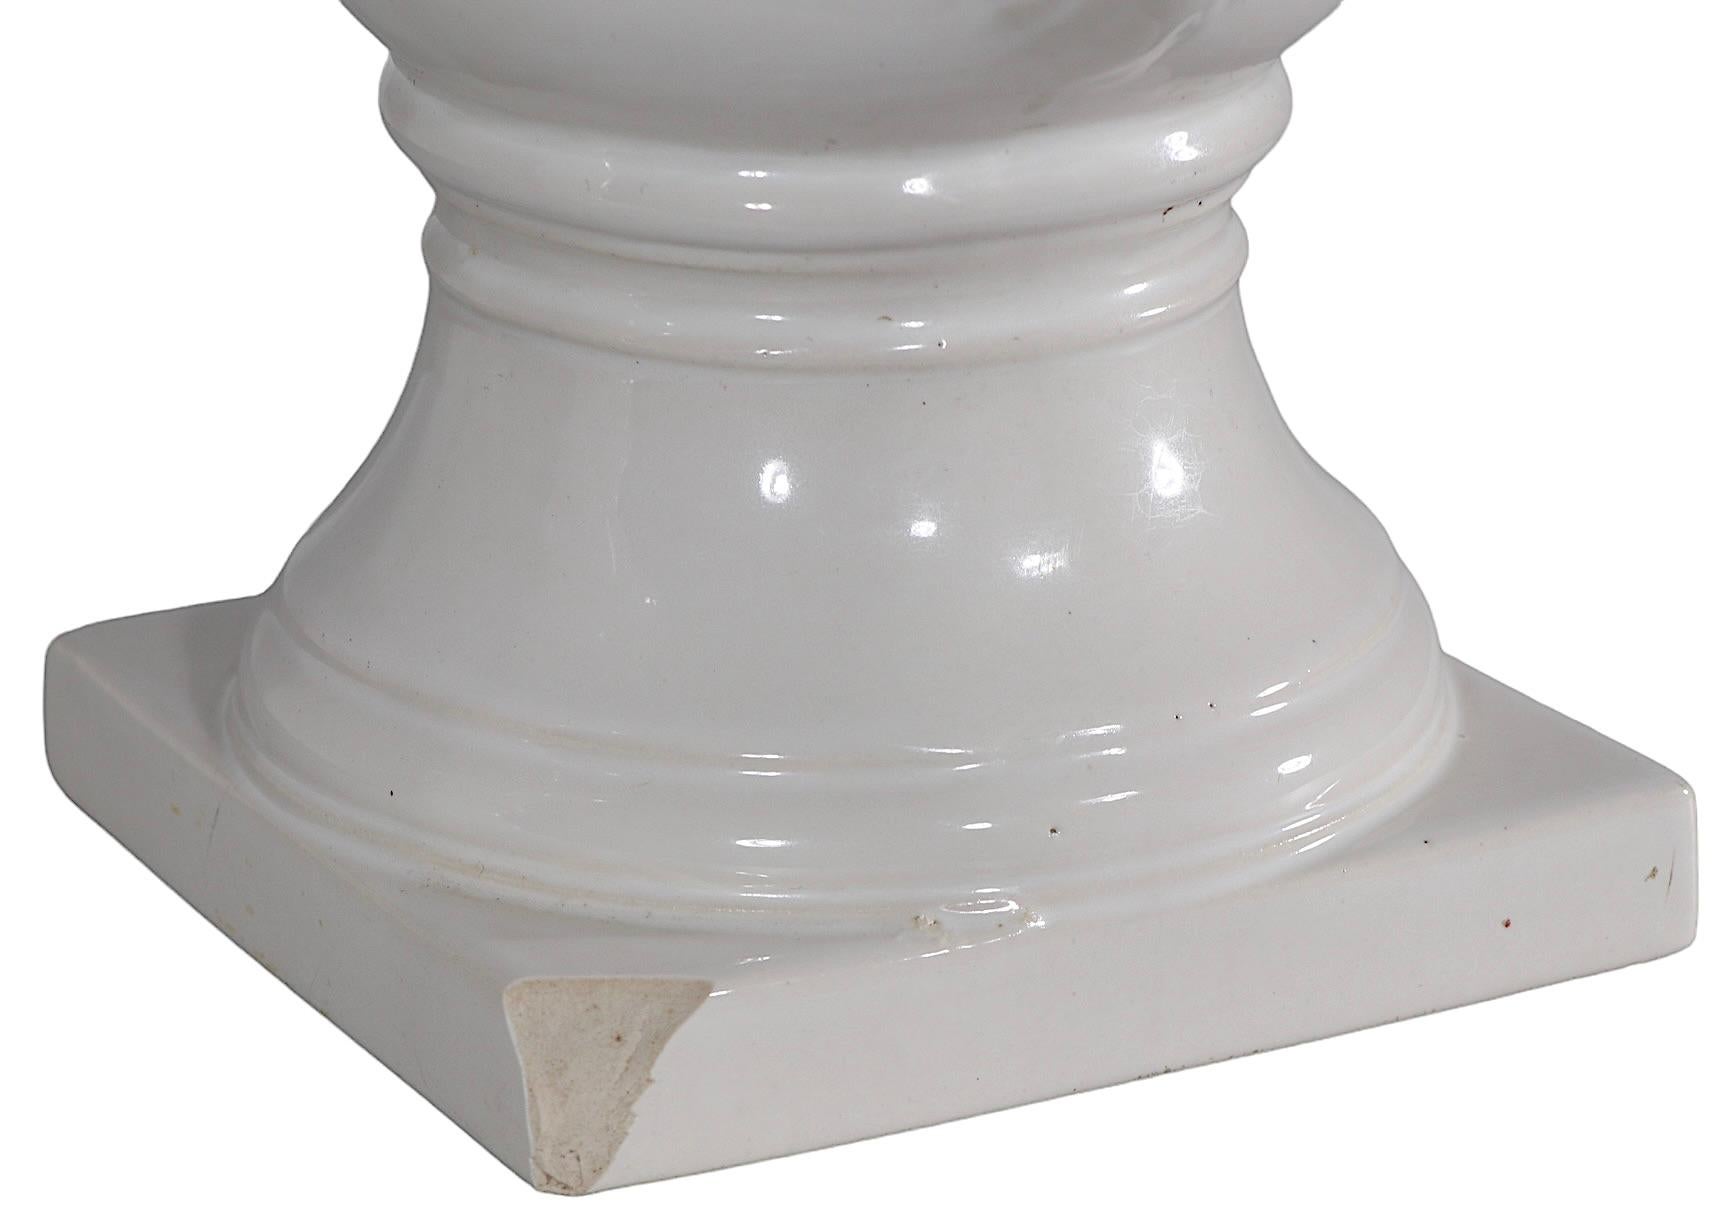 Pr. White on White Ceramic Urn Campagna  Form Vases   In Good Condition For Sale In New York, NY